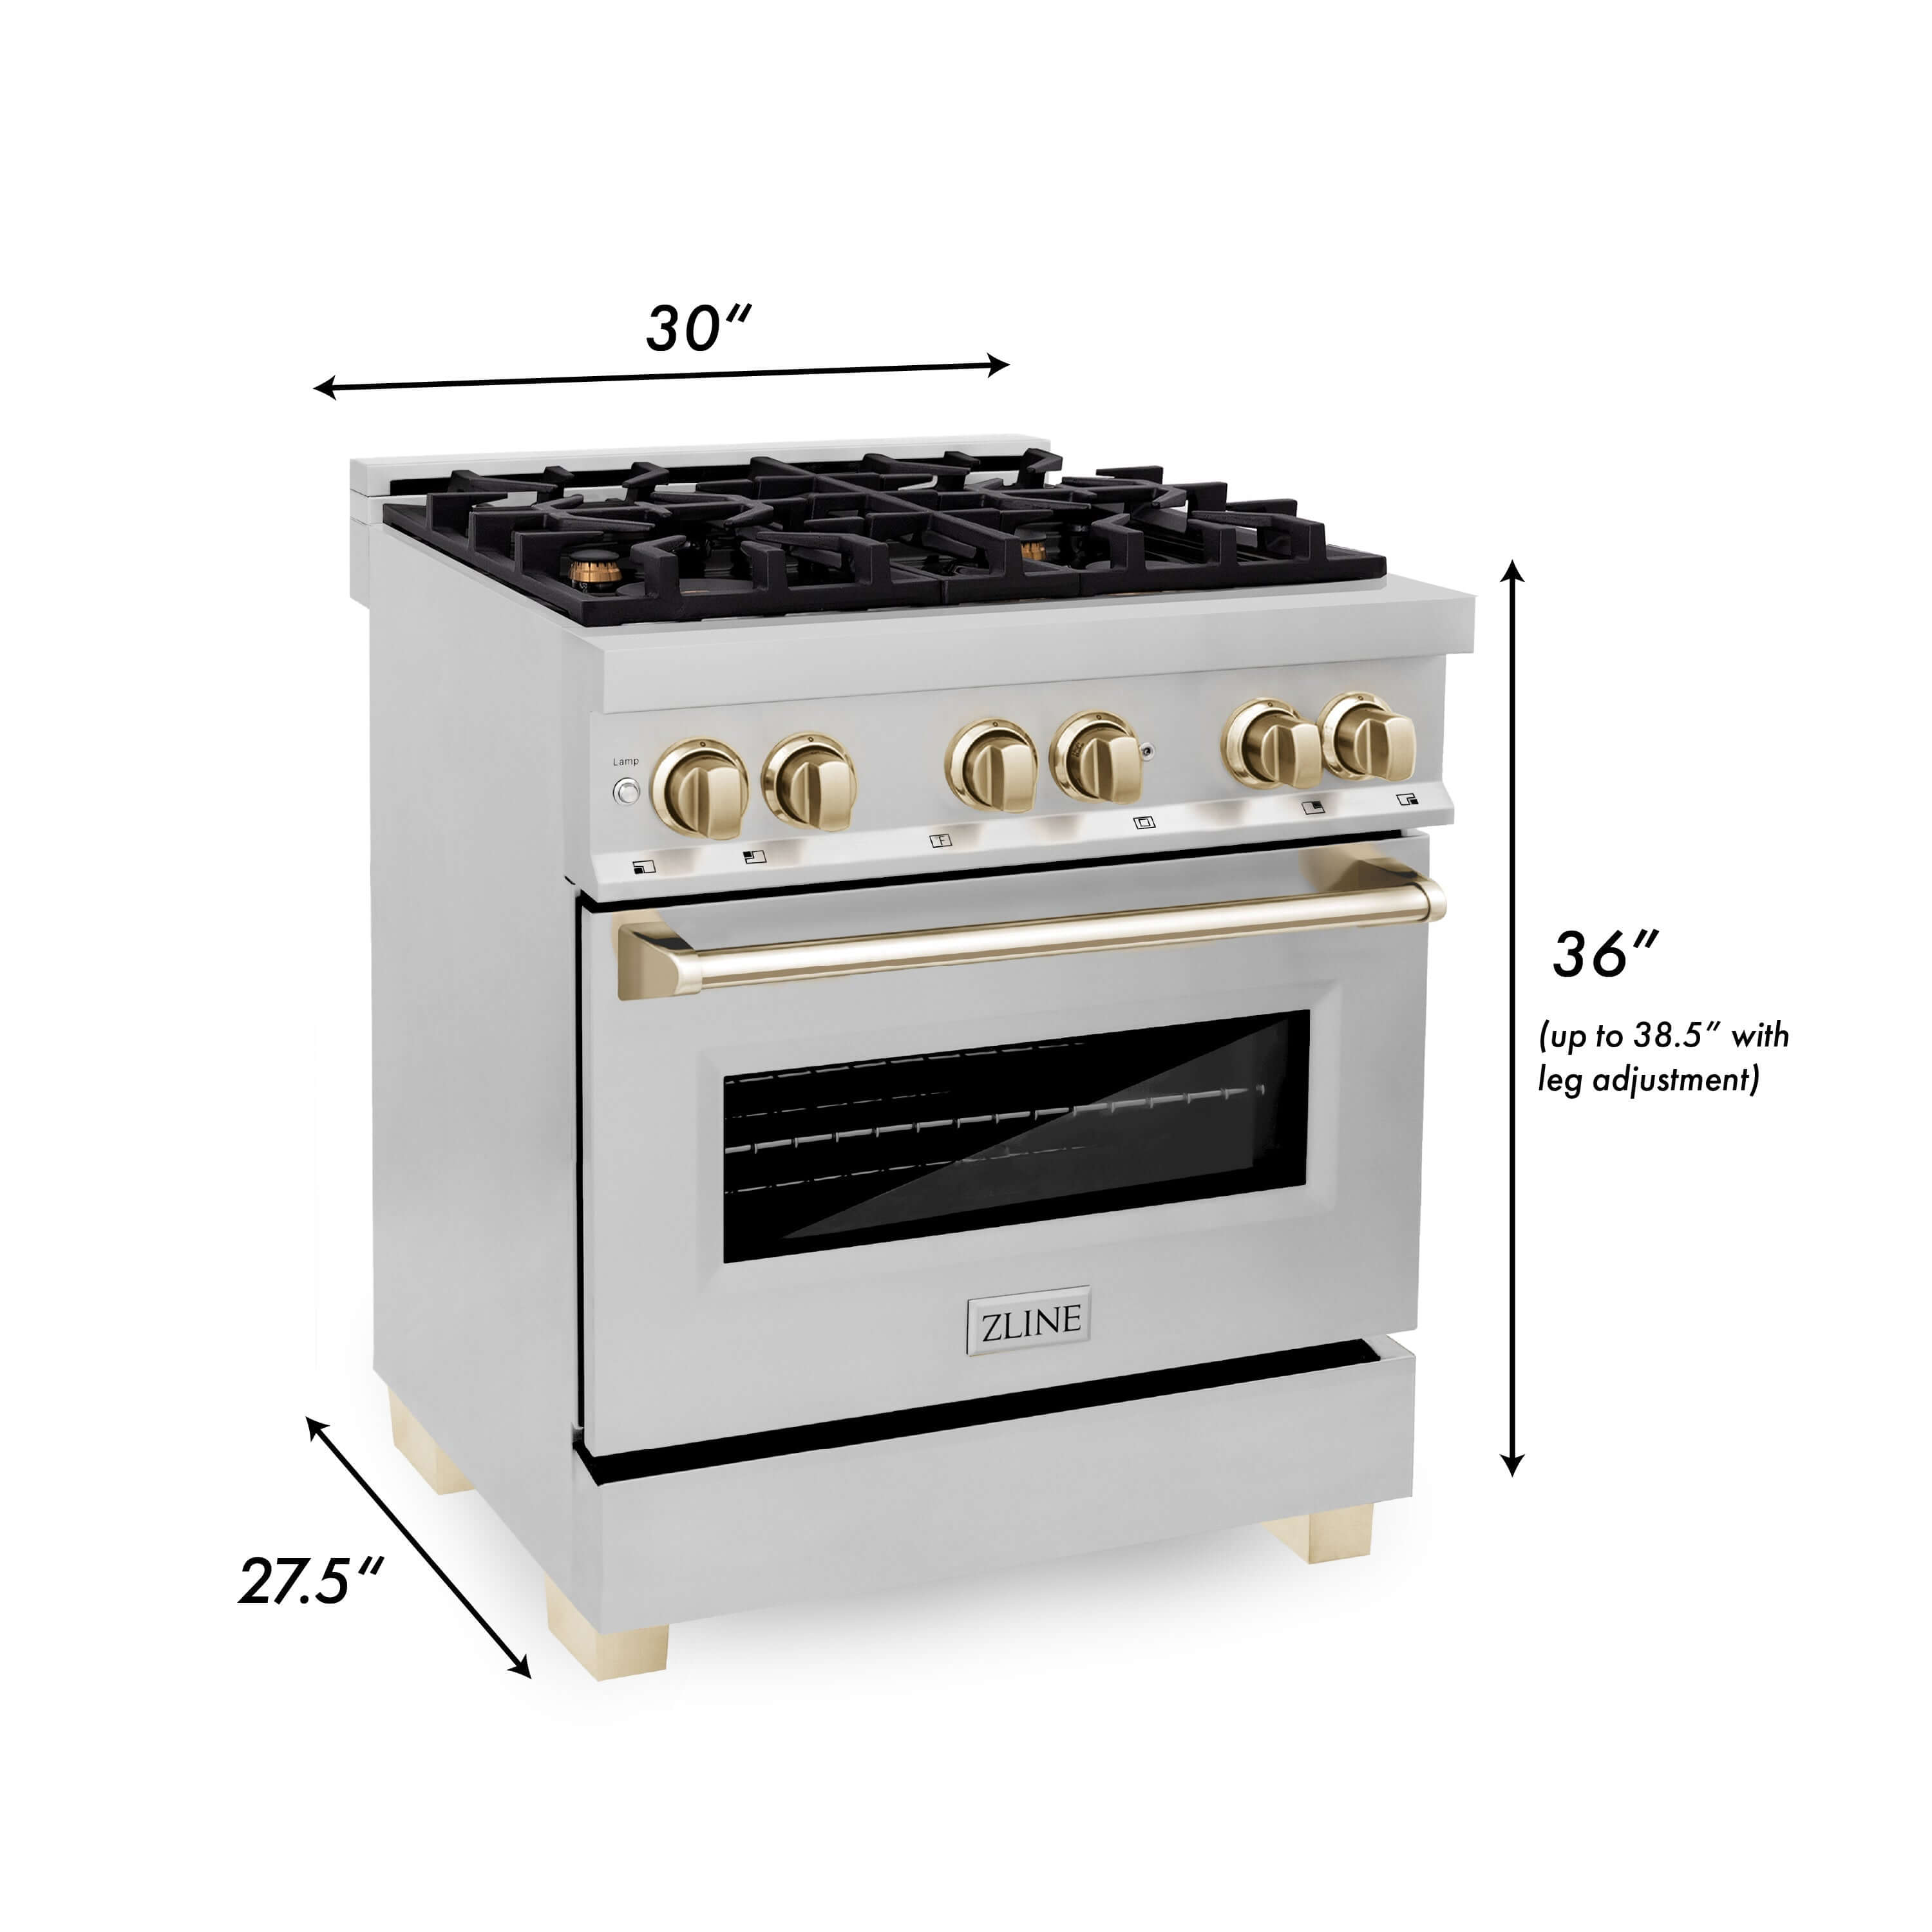 ZLINE Autograph Edition 30 in. 4.0 cu. ft. Dual Fuel Range with Gas Stove and Electric Oven in Stainless Steel with Gold Accents (RAZ-30) Dimensions